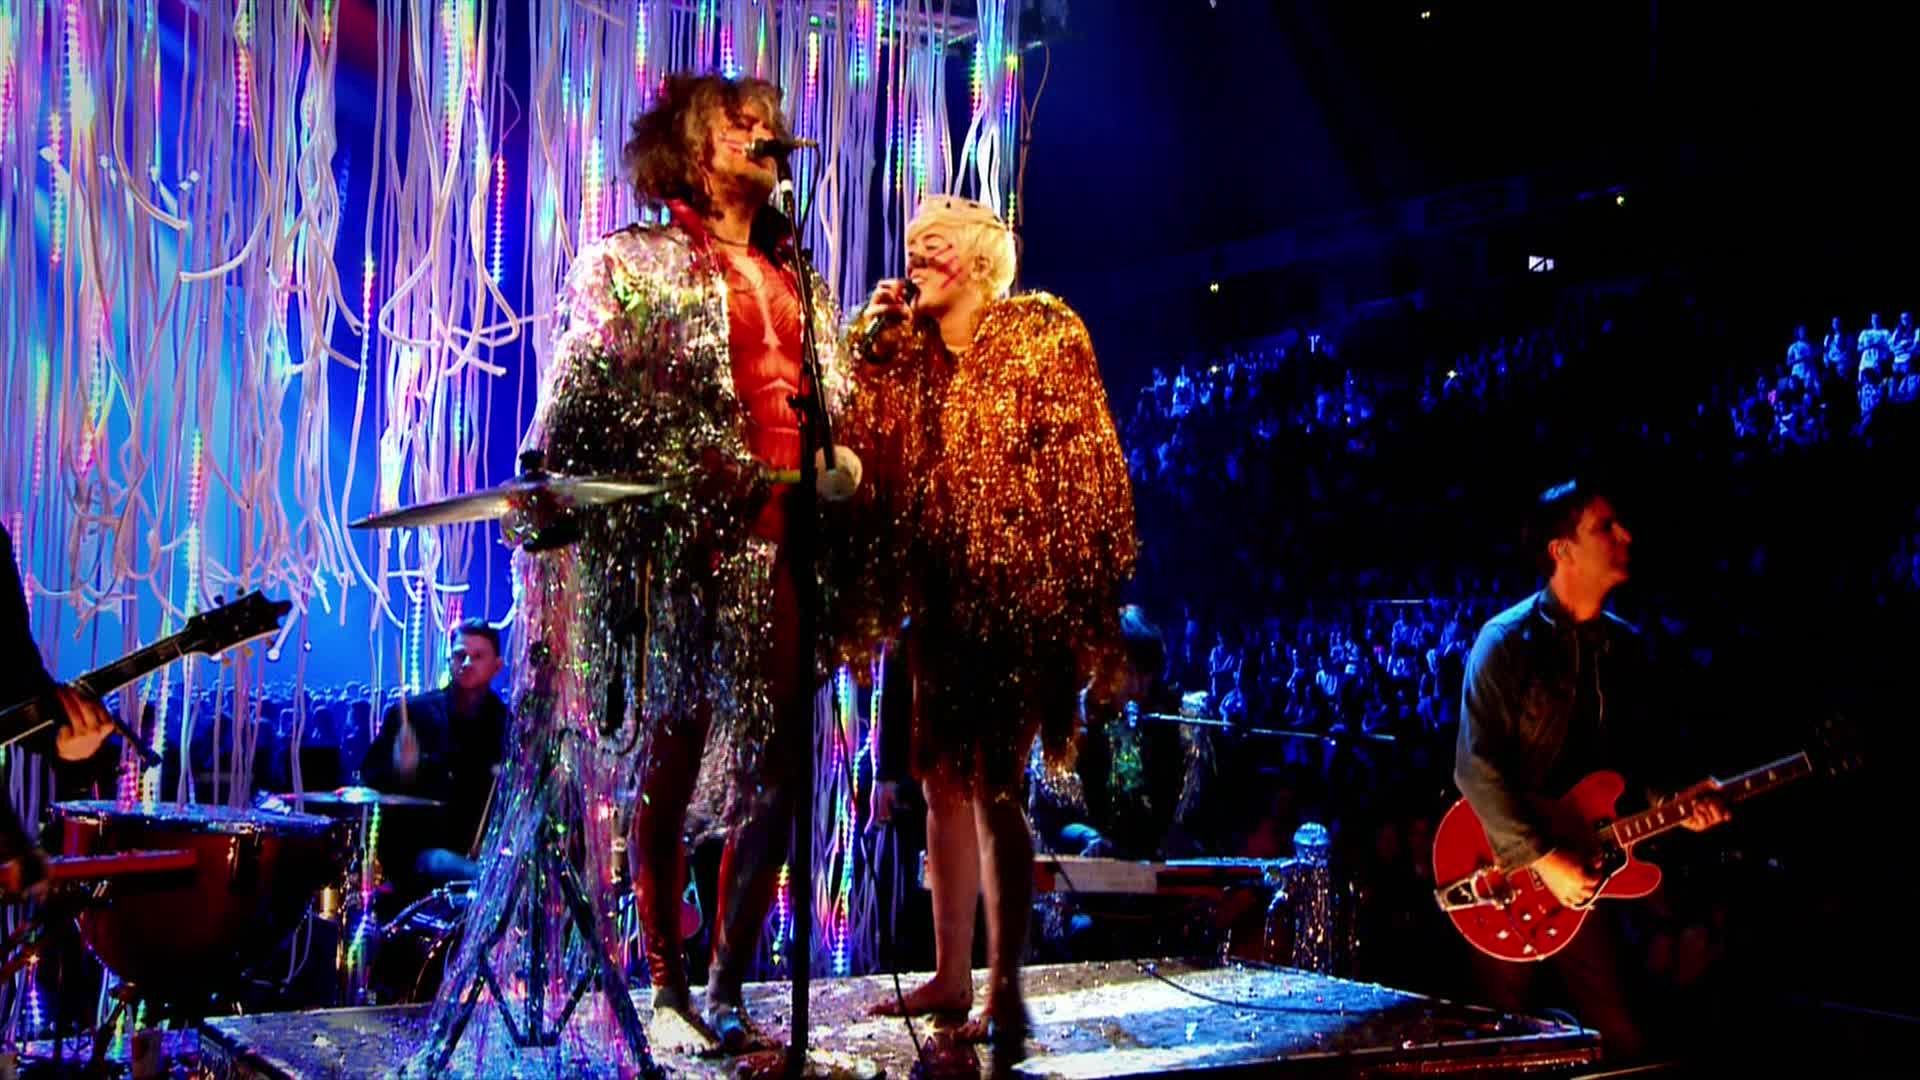 Miley Cyrus [ft The Flaming Lips] - 2014-05-18, Billboard Music Awards - 1080 TS - LSD preview 15